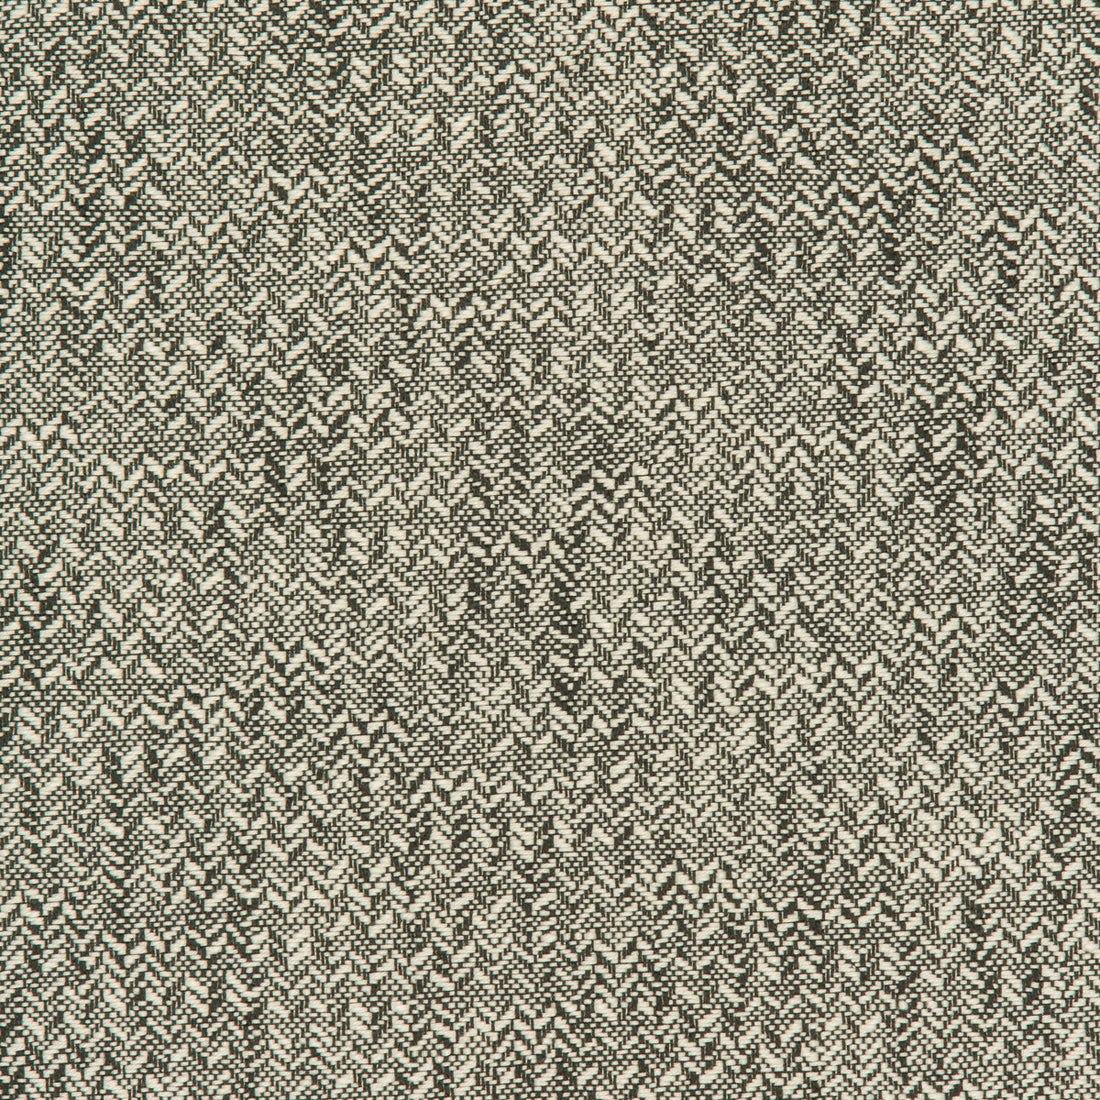 Kravet Design fabric in 36089-21 color - pattern 36089.21.0 - by Kravet Design in the Inside Out Performance Fabrics collection